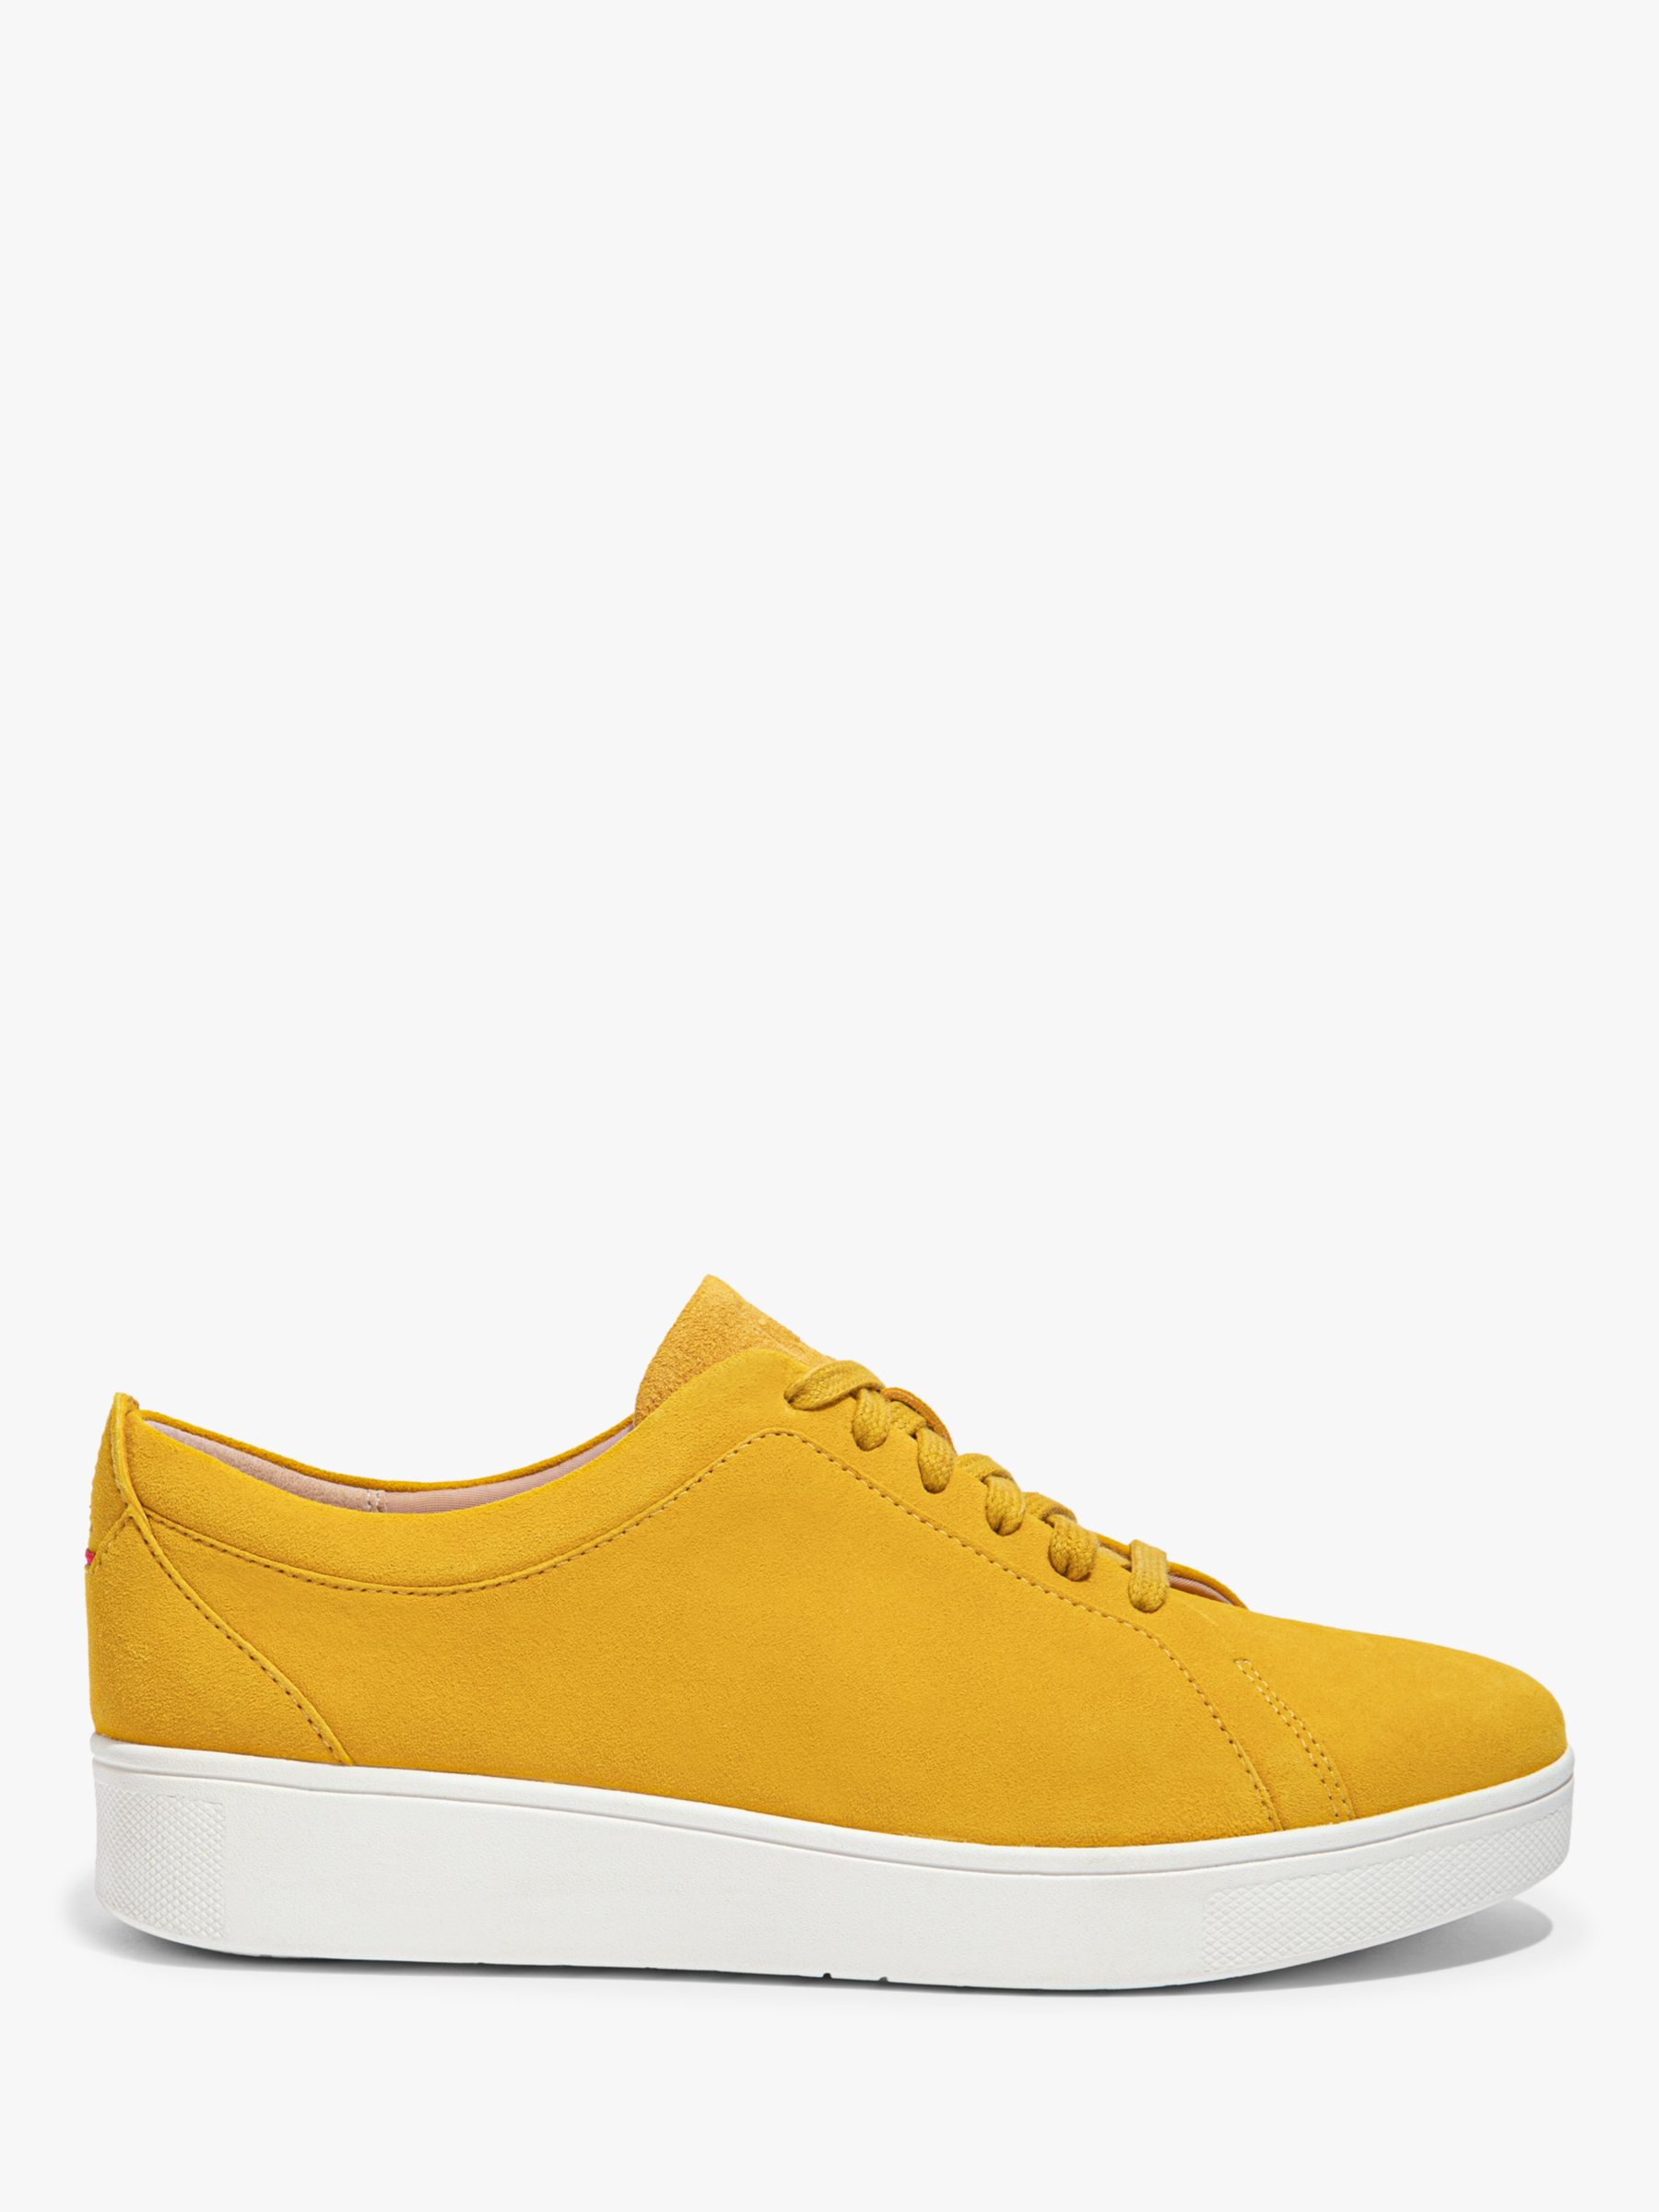 FitFlop Rally Lace Up Suede Trainers, Yellow at John Lewis & Partners